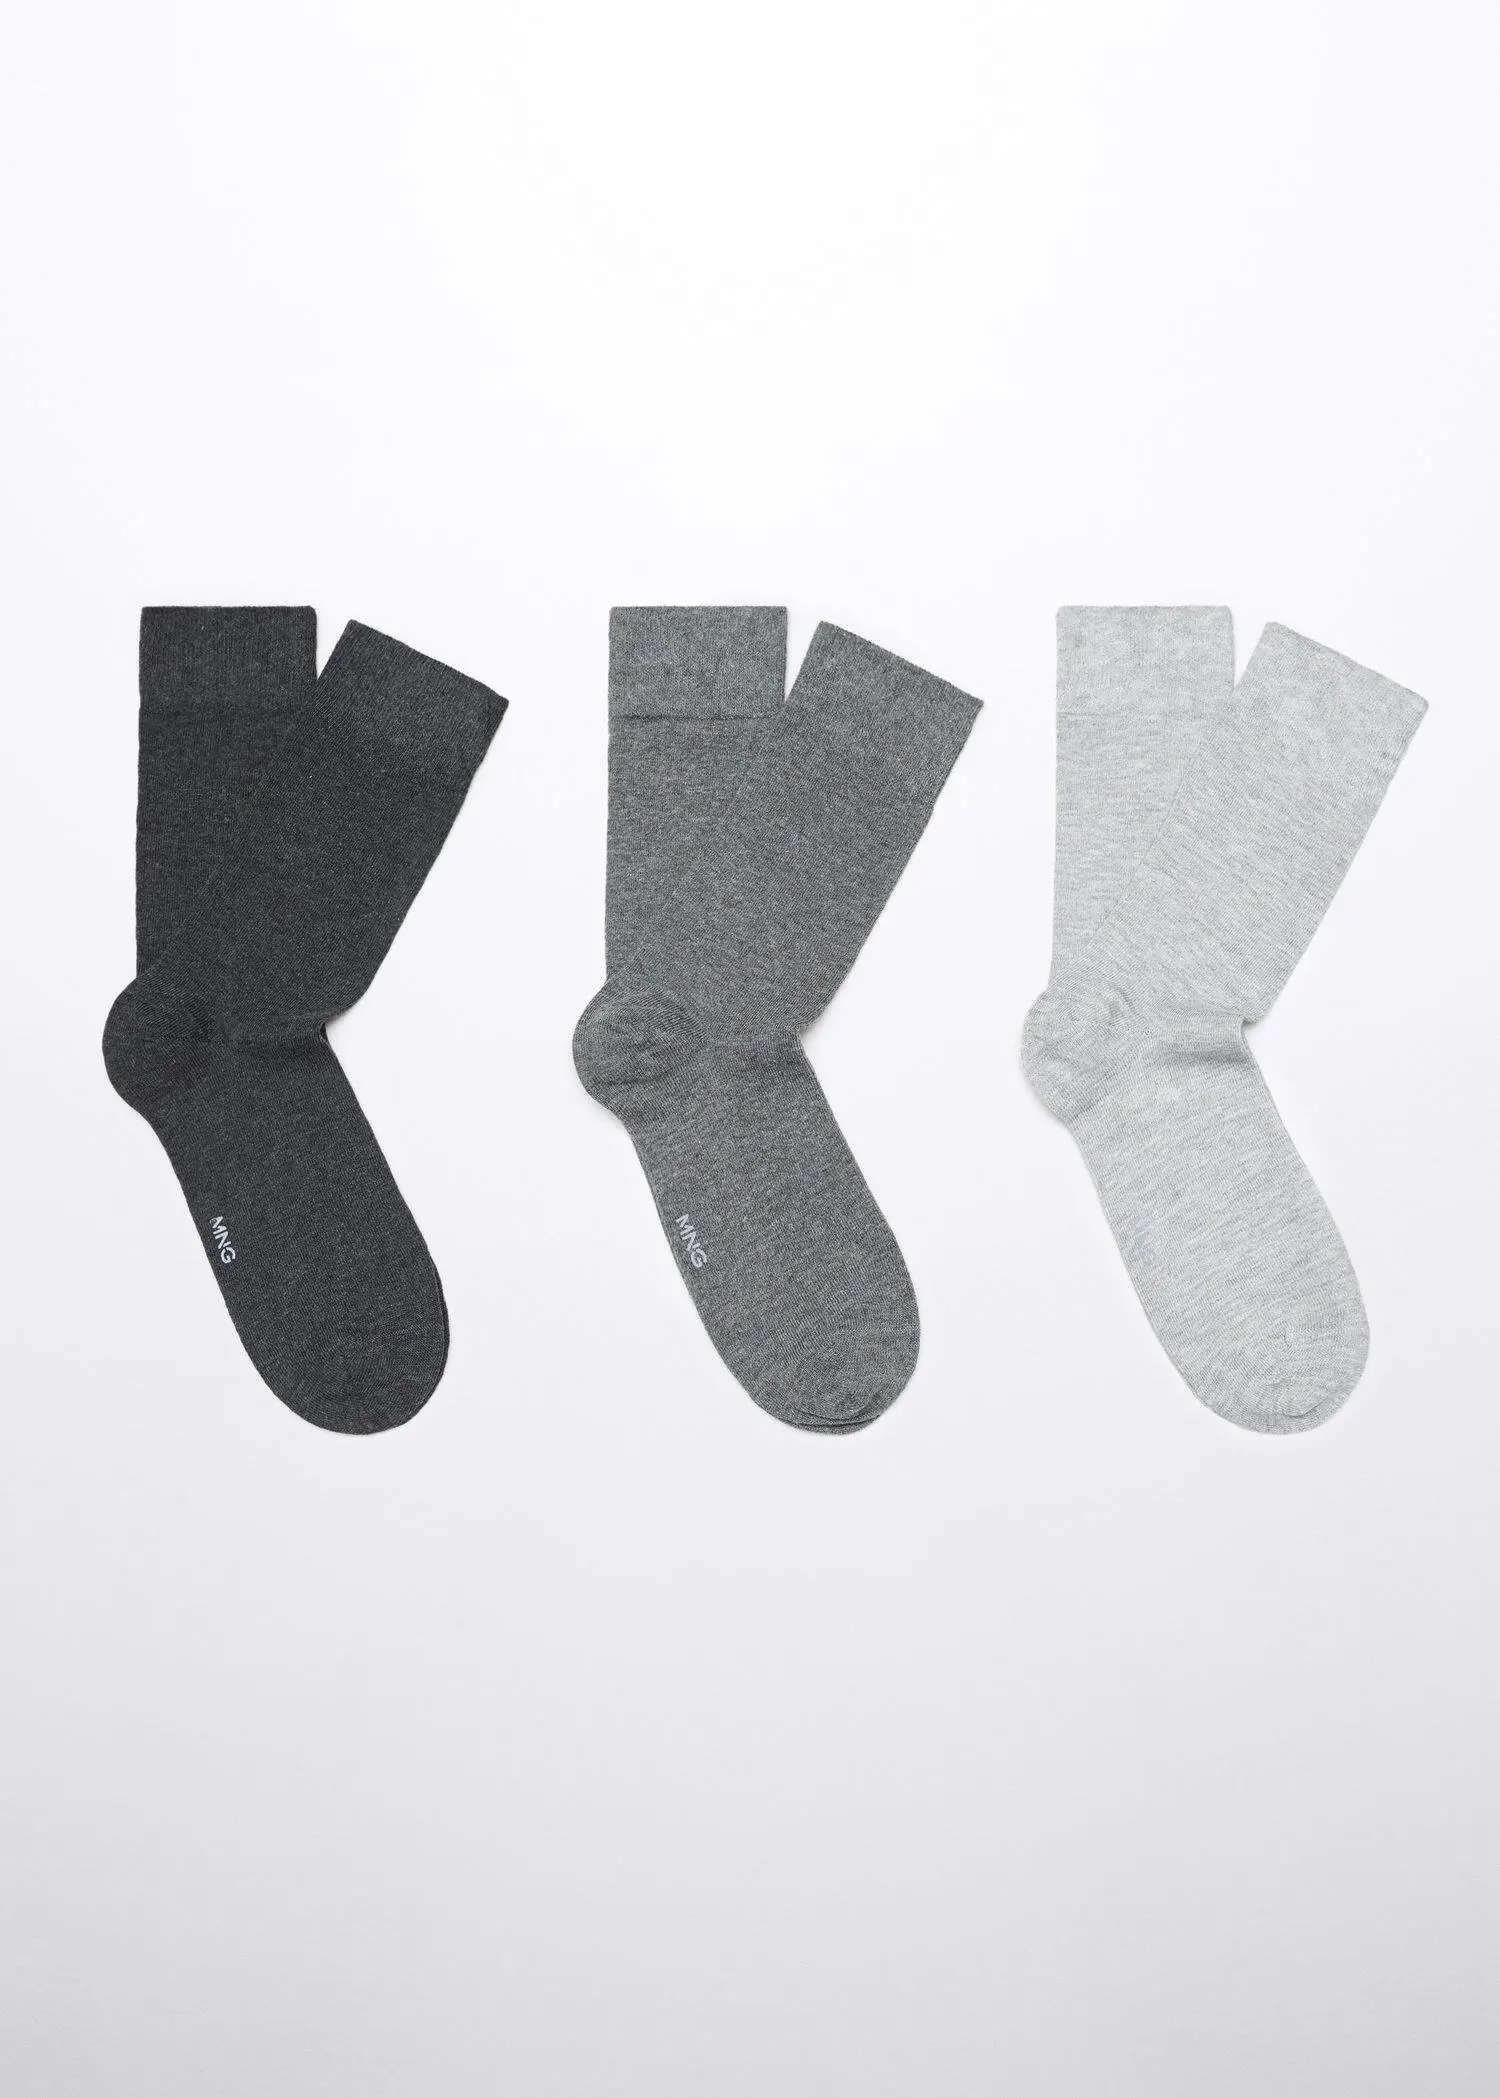 Mango Pack of 3 cotton socks. three pairs of socks in different colors on a white surface. 